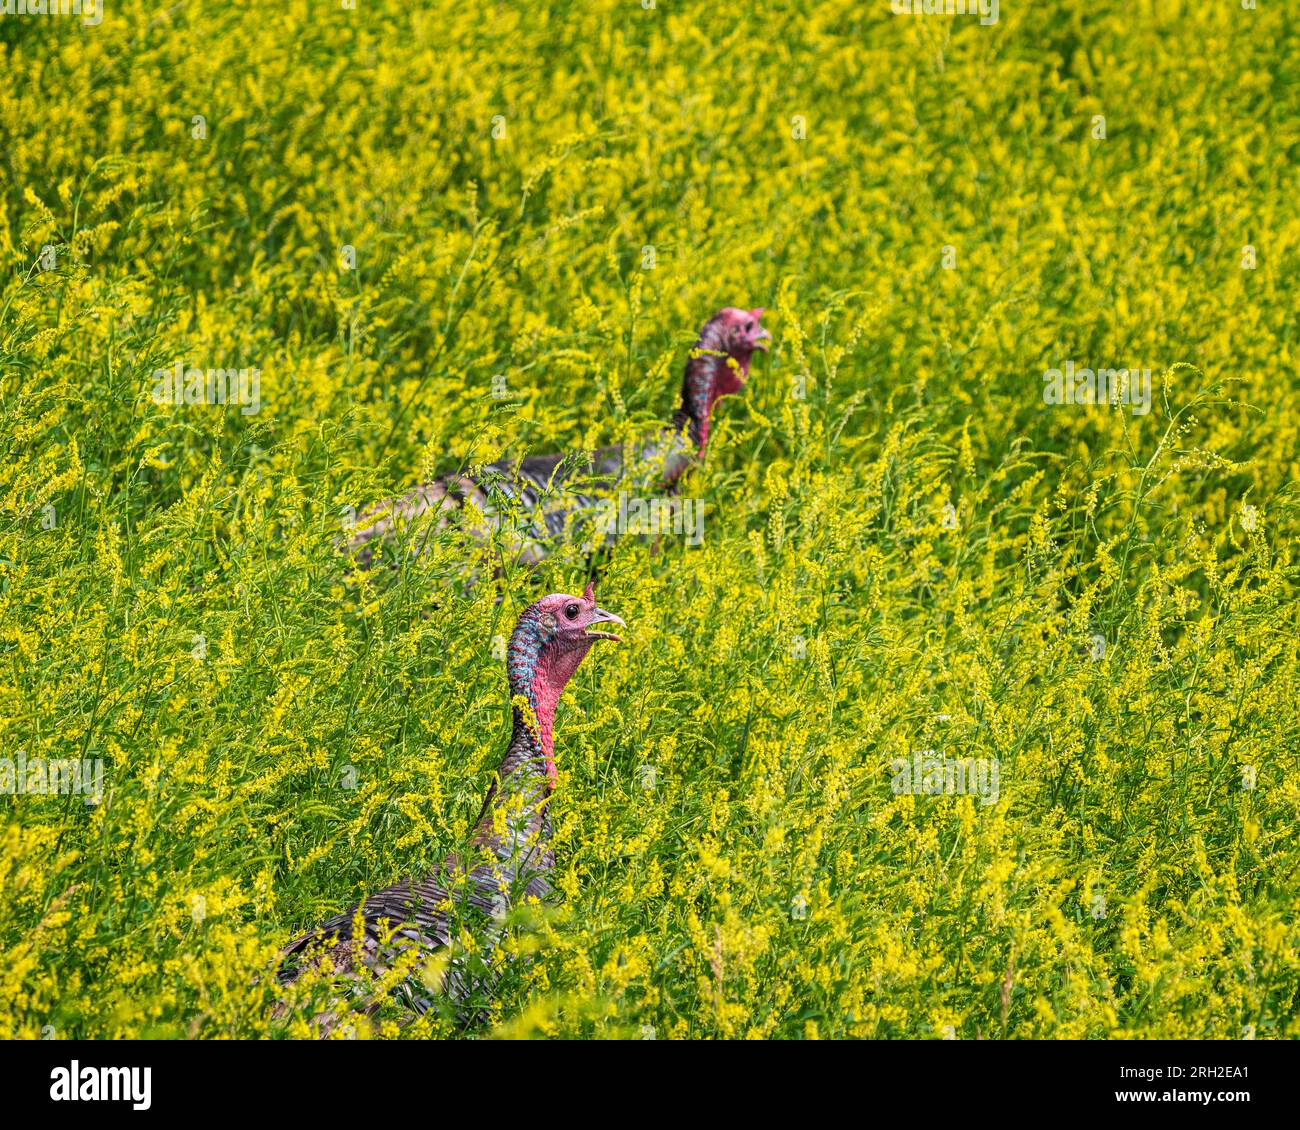 A flock of wild turkeys (Meleagris gallopavo) in a field of yellow flowers in the North Unit of Theodore Roosevelt National Park in North Dakota Stock Photo